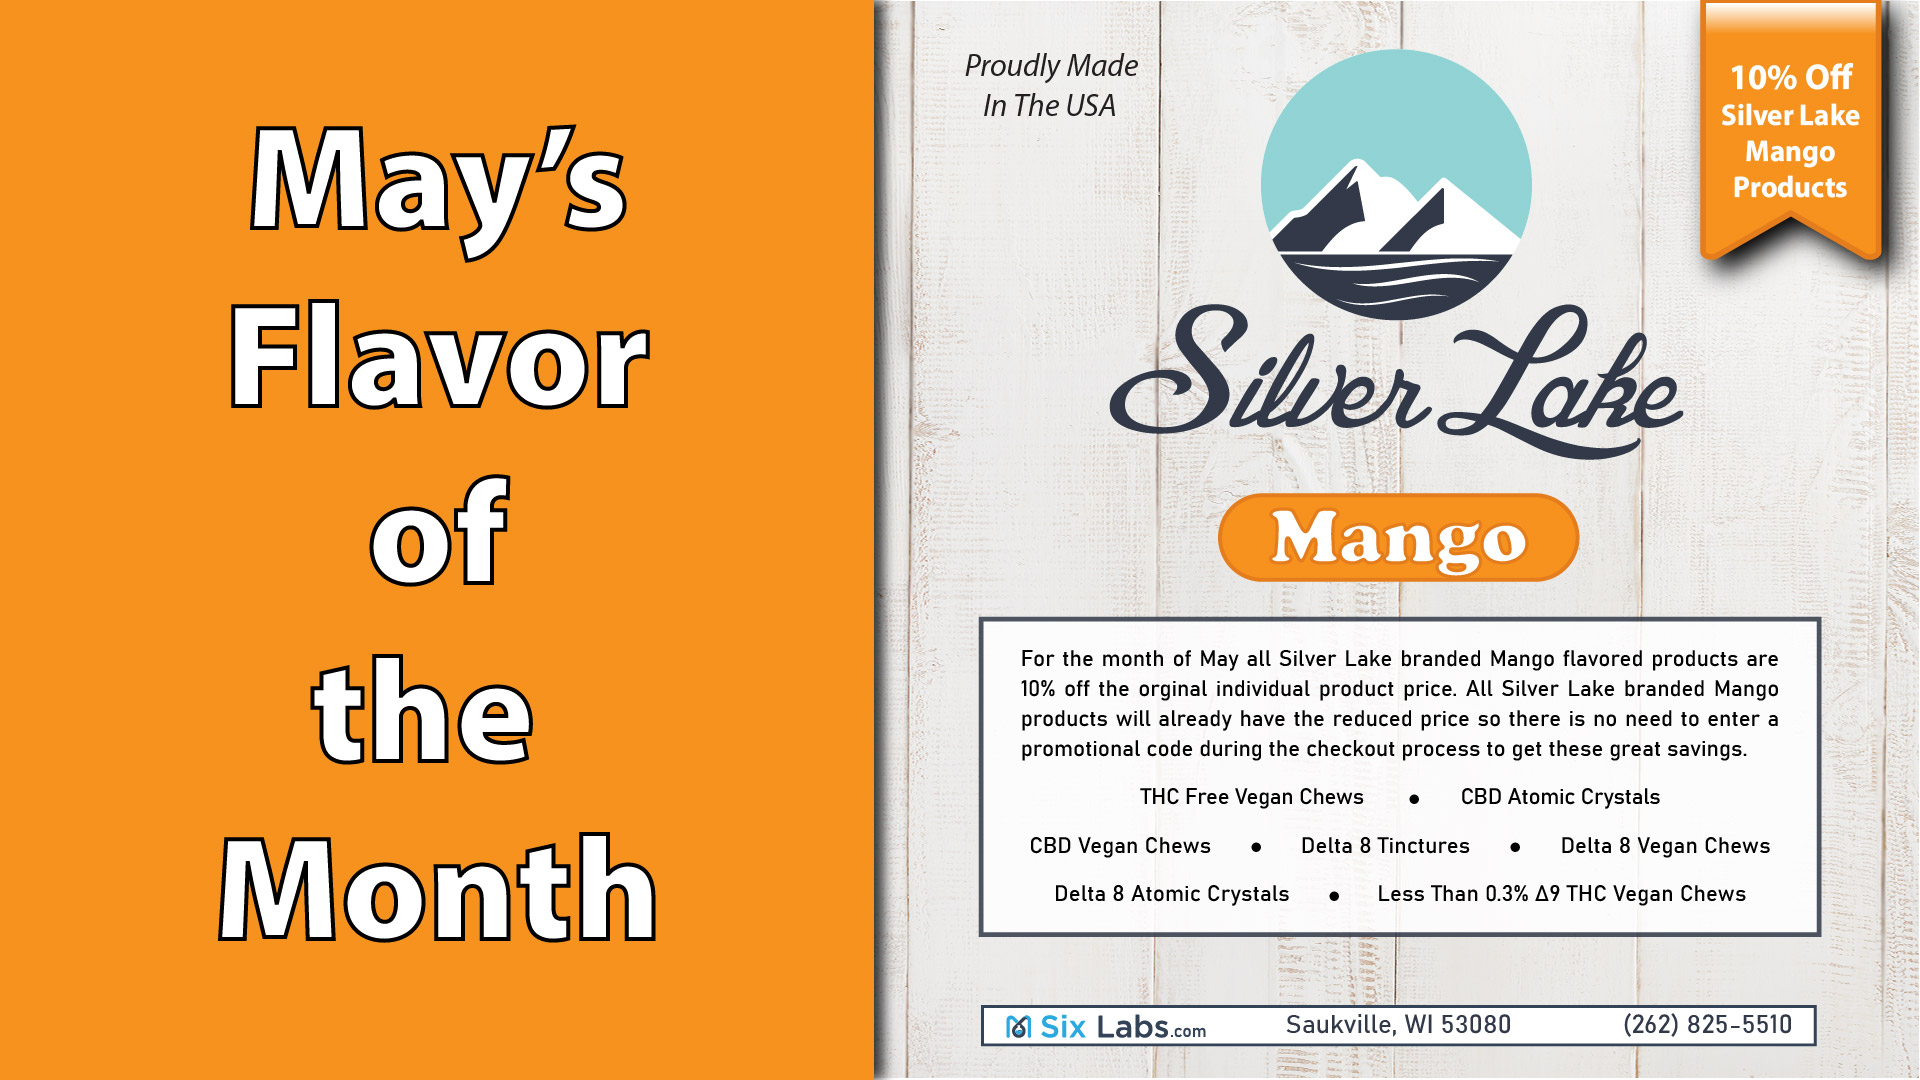 Flavor of the Month_MAY_Mango_Web Page 1920 x 1080-01